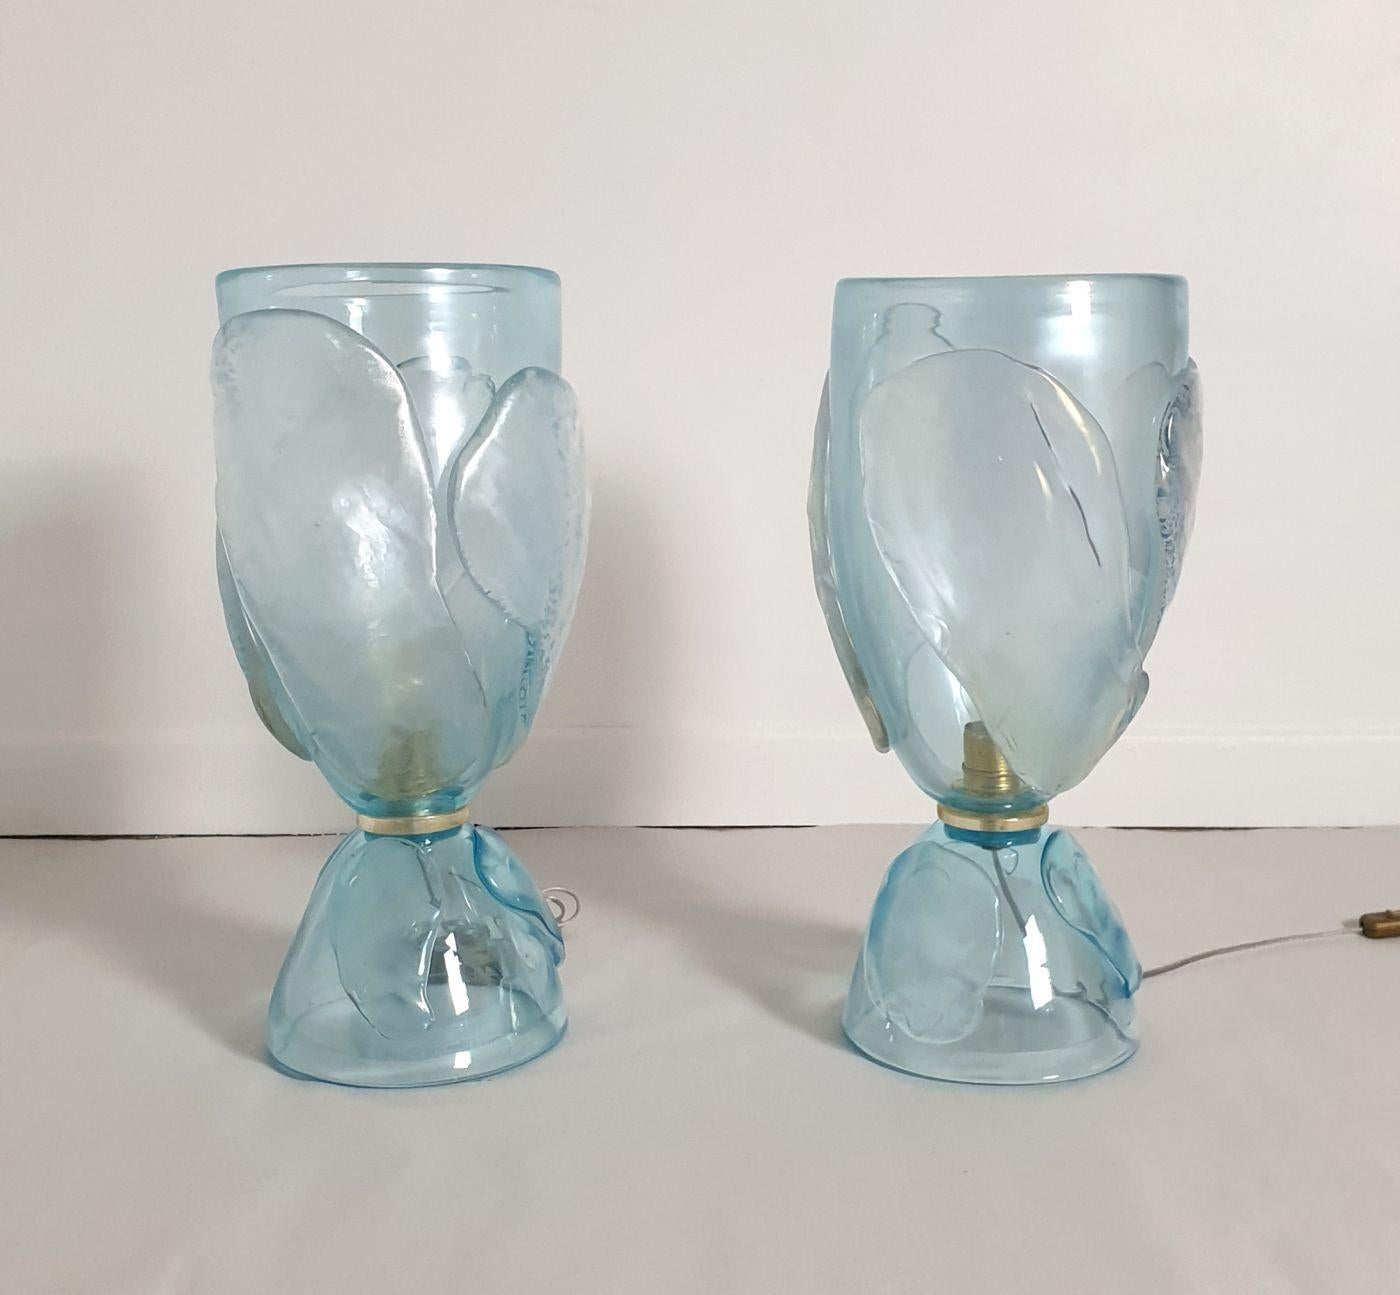 Pair of large Mid Century Modern sky blue Murano glass lamps, Italy 1970, attributed to Seguso.
The pair of vintage lamps are handmade in a thick and heavy Murano glass.
The glass is in a transparent sky blue color; and becomes translucent with the